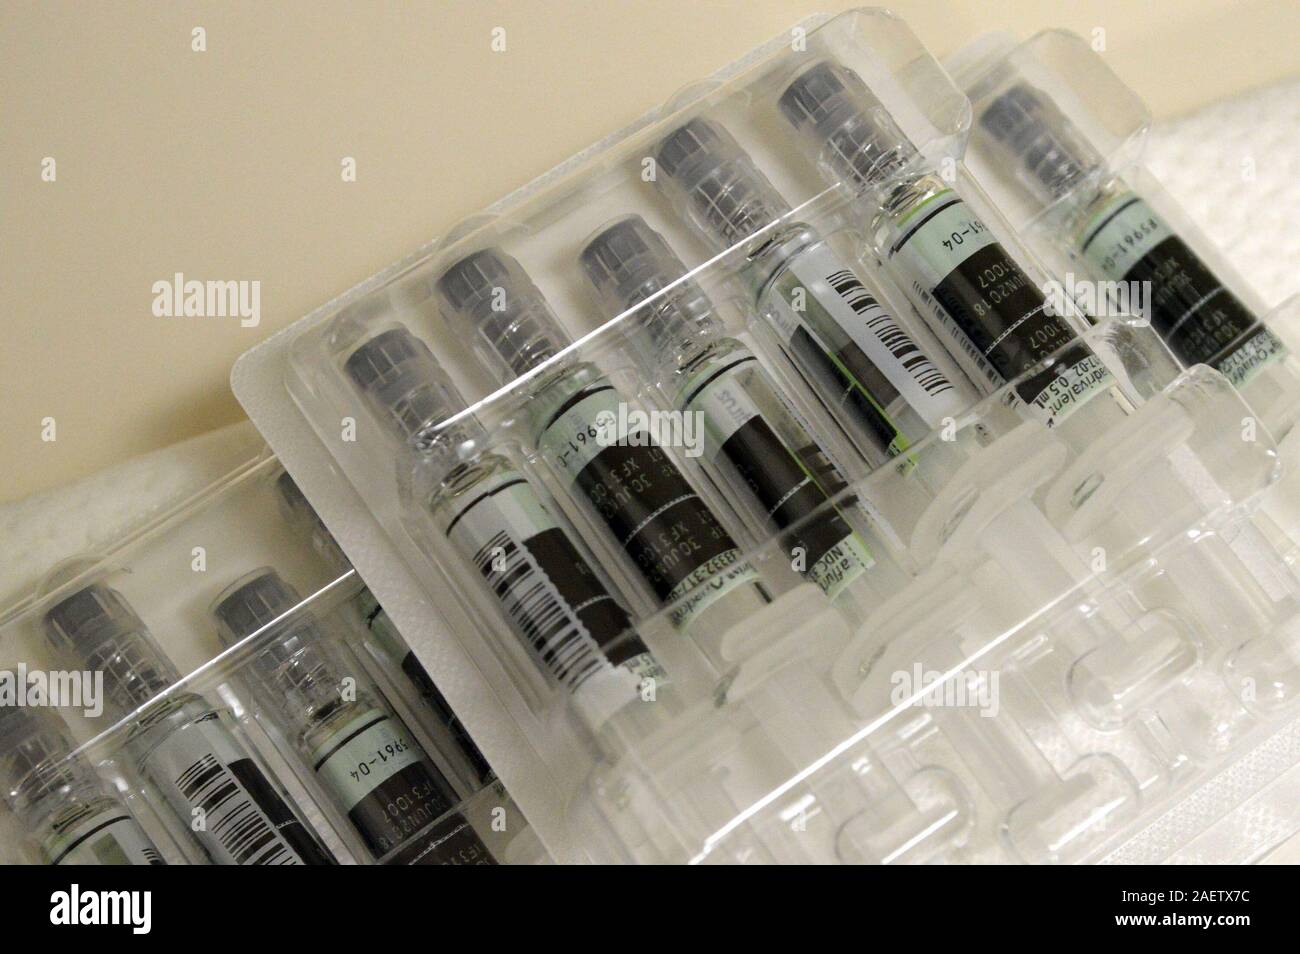 Influenza vaccines are seen at St. Mary Medical Center Thursday, November 9, 2017 in Langhorne, Pennsylvania. (Photo by William Thomas Cain) Stock Photo